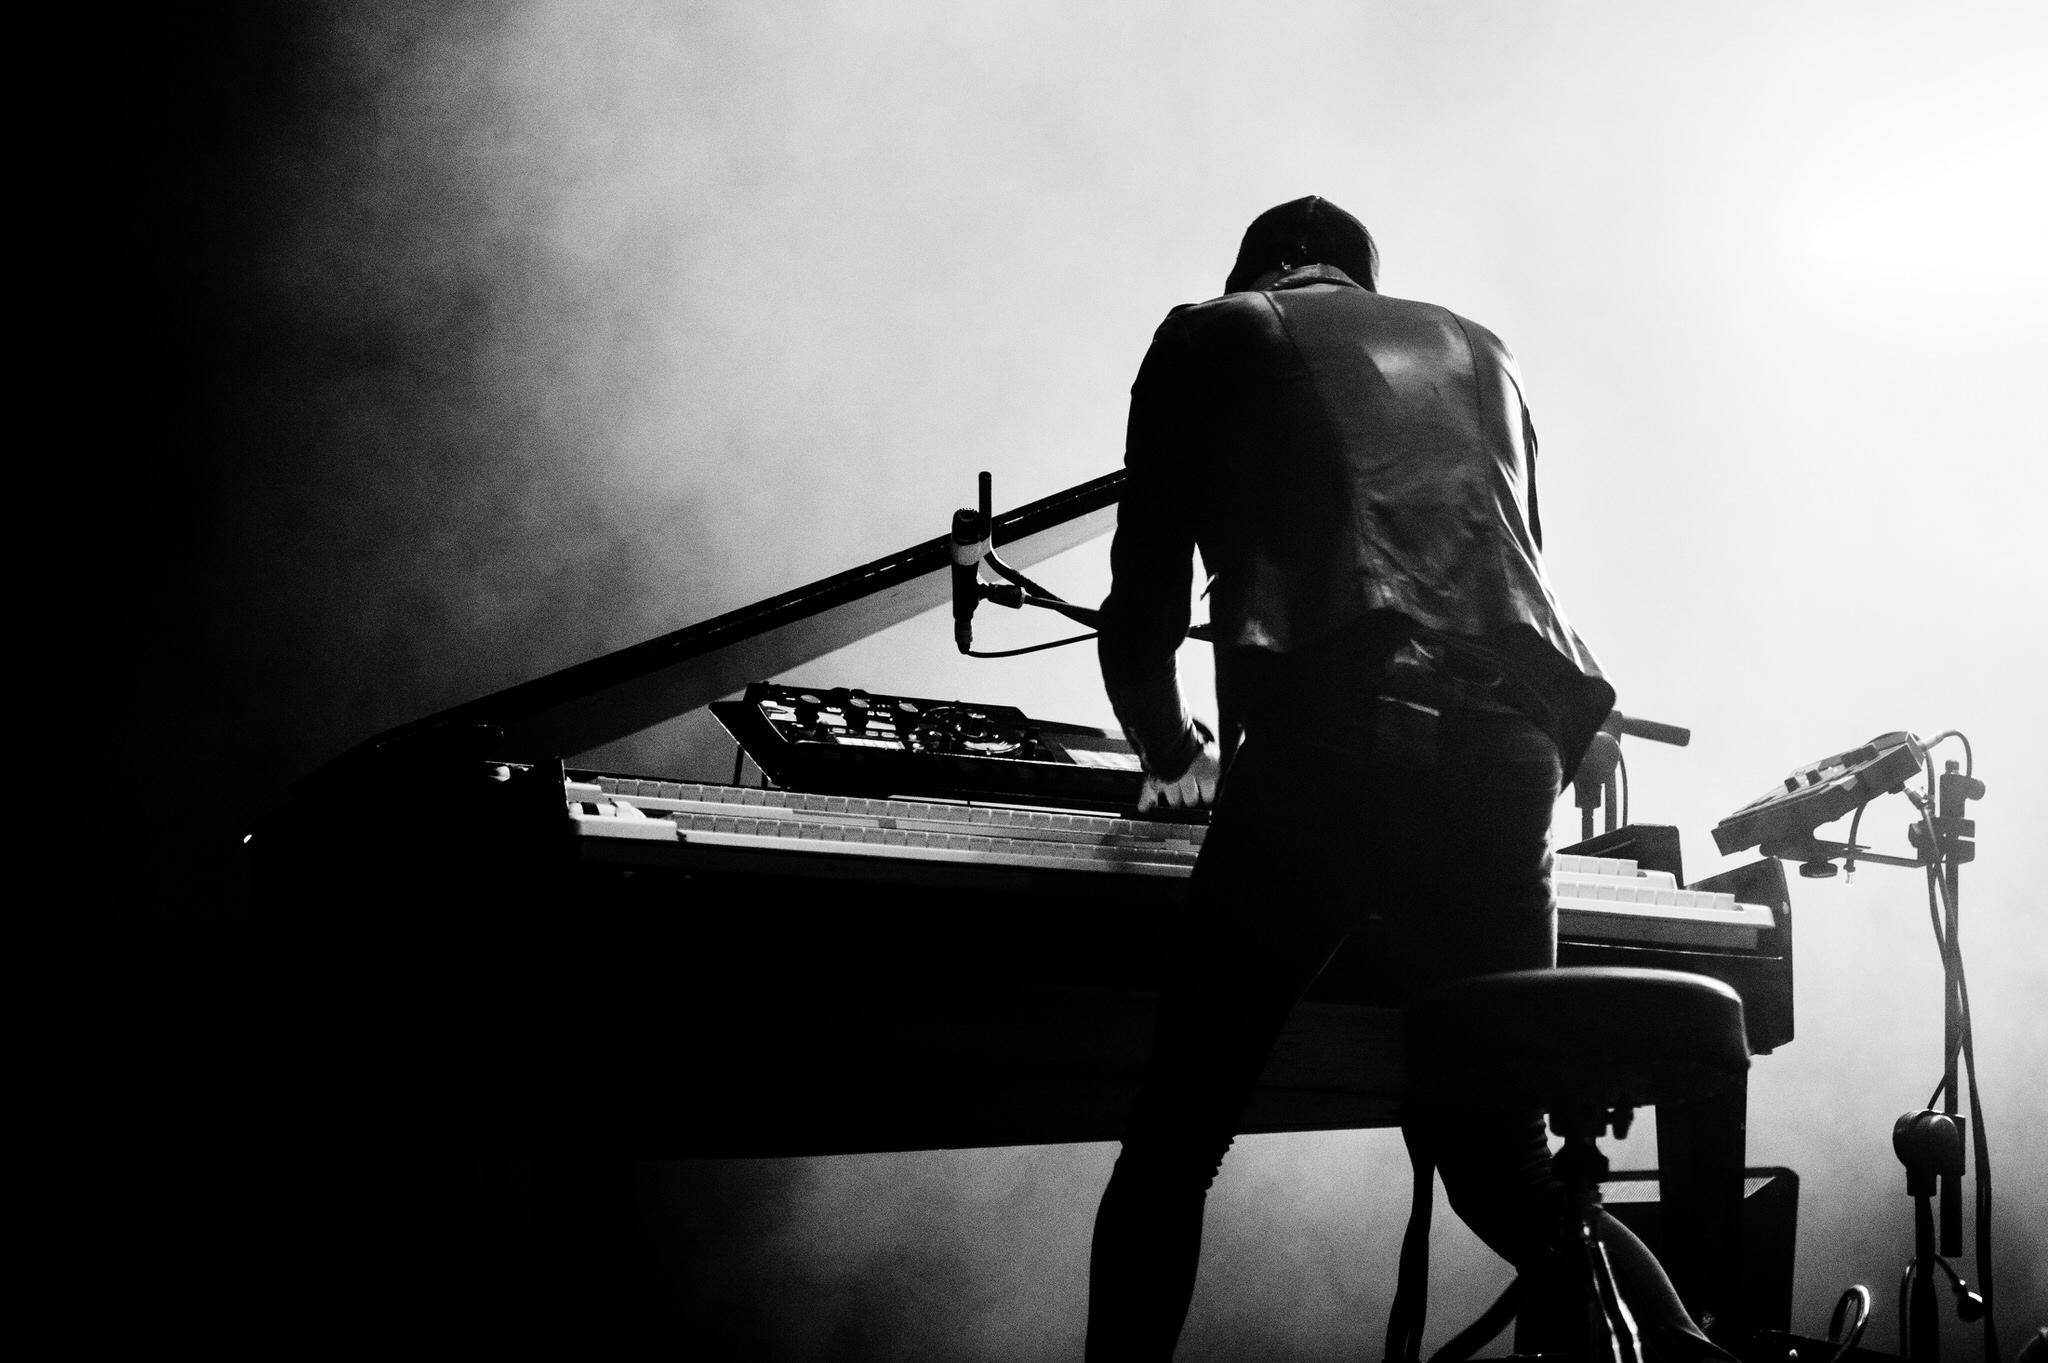 The Bloody Beetroots Live